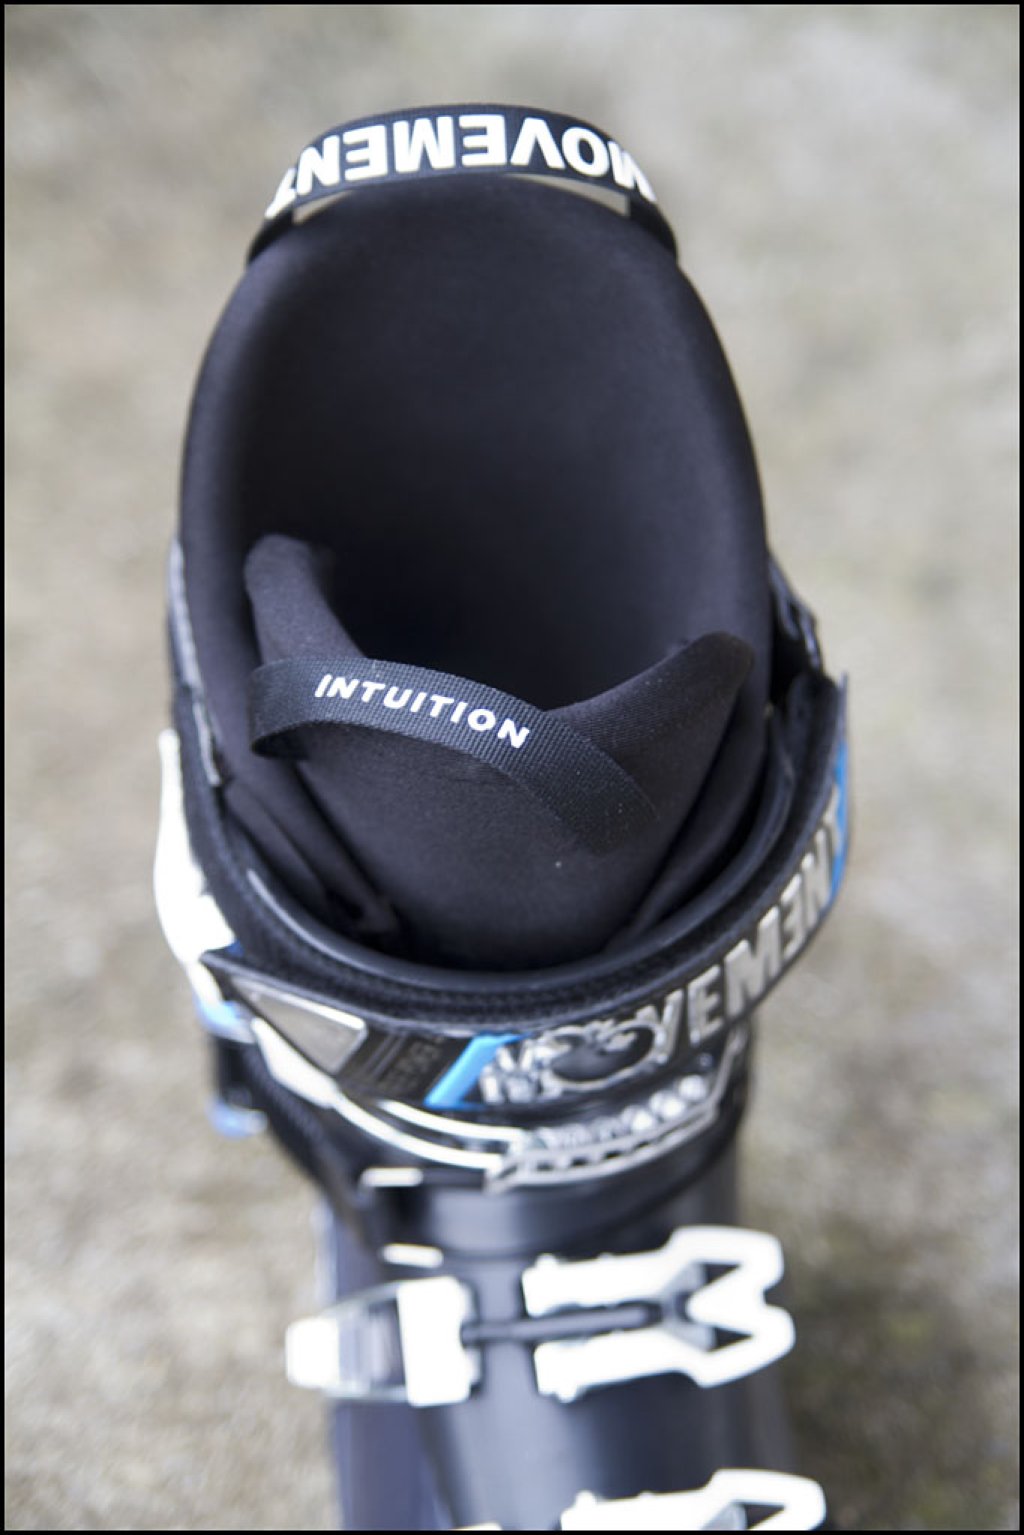 The Intuition thermoform inner shoe is easy to adjust